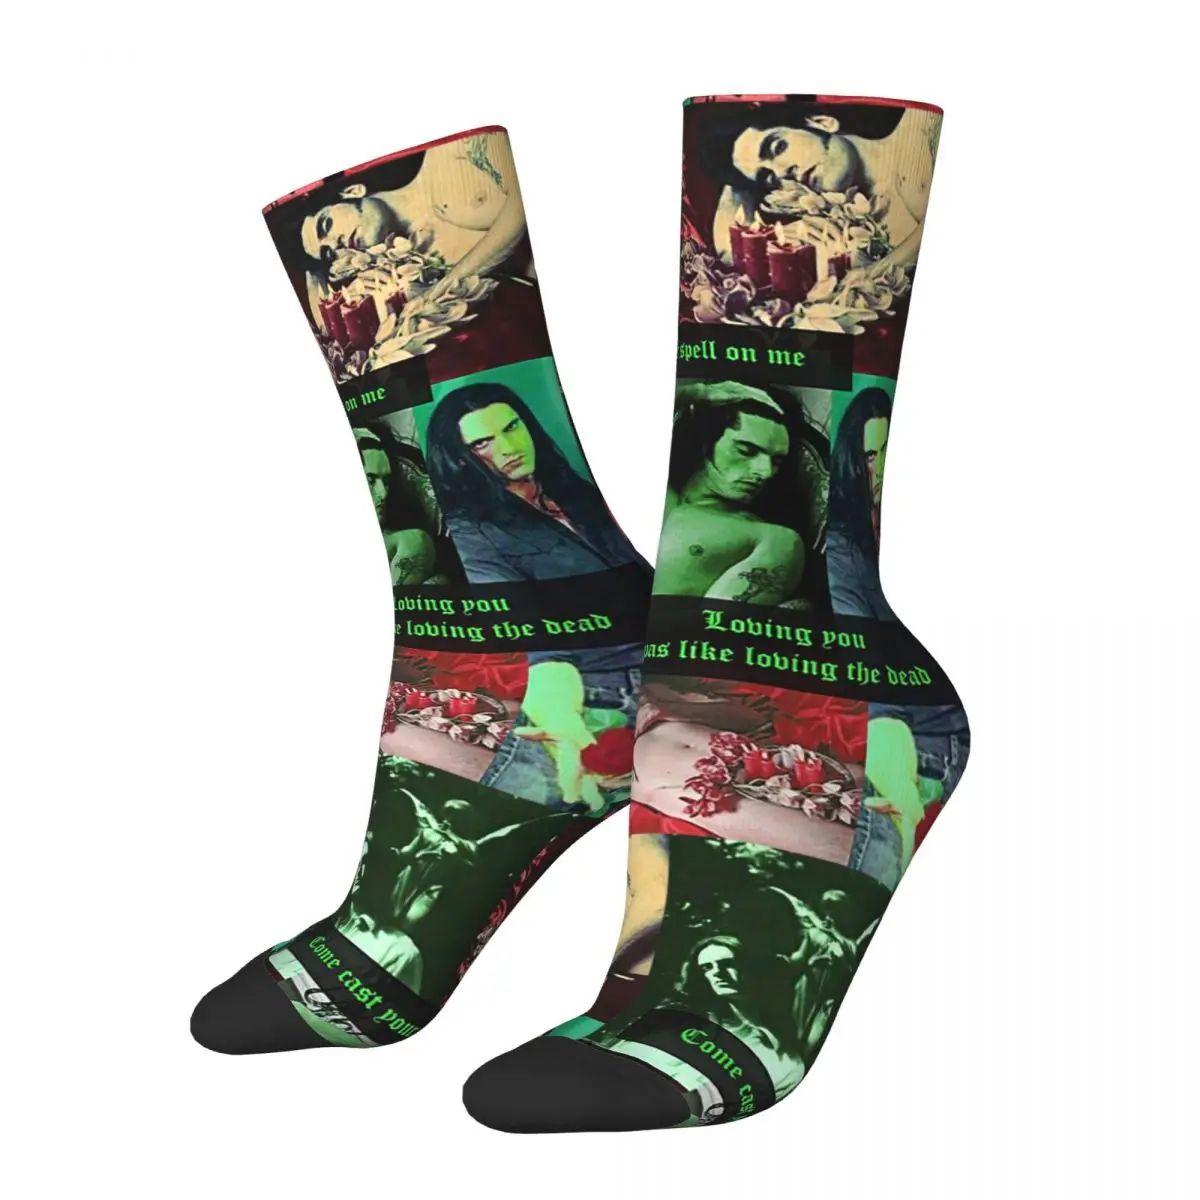 

Peter Steele Dark Goth Type O Negative Merch Socks High Quality Middle Tube Socks Cotton for Women Men Small Gifts